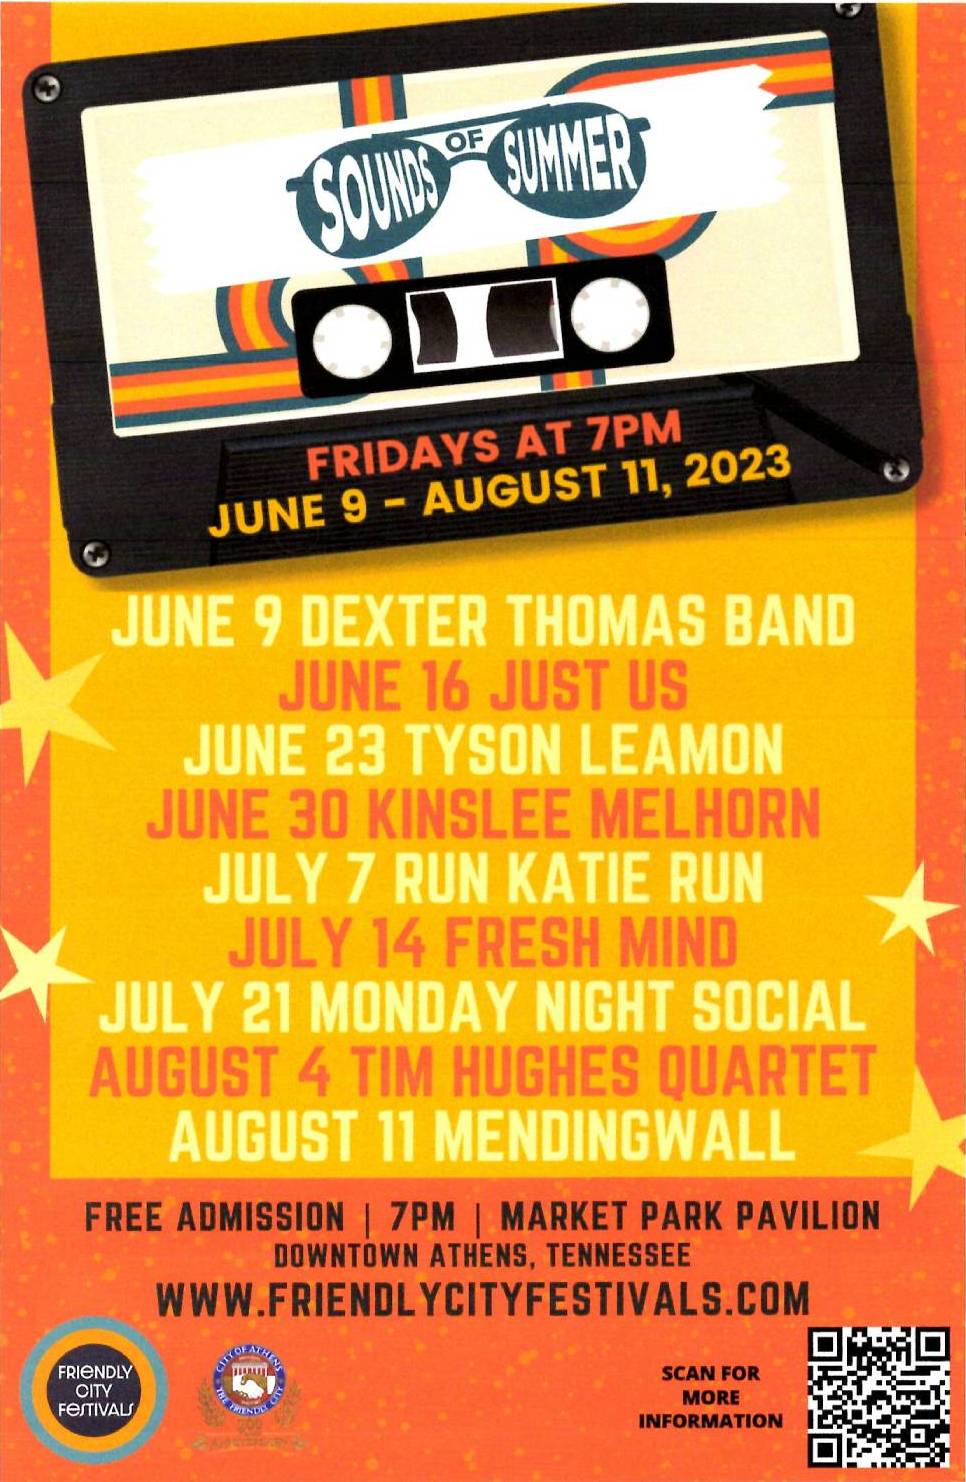 Sounds of Summer 2023 Schedule - Friendly City Festivals Downtown Athens, TN